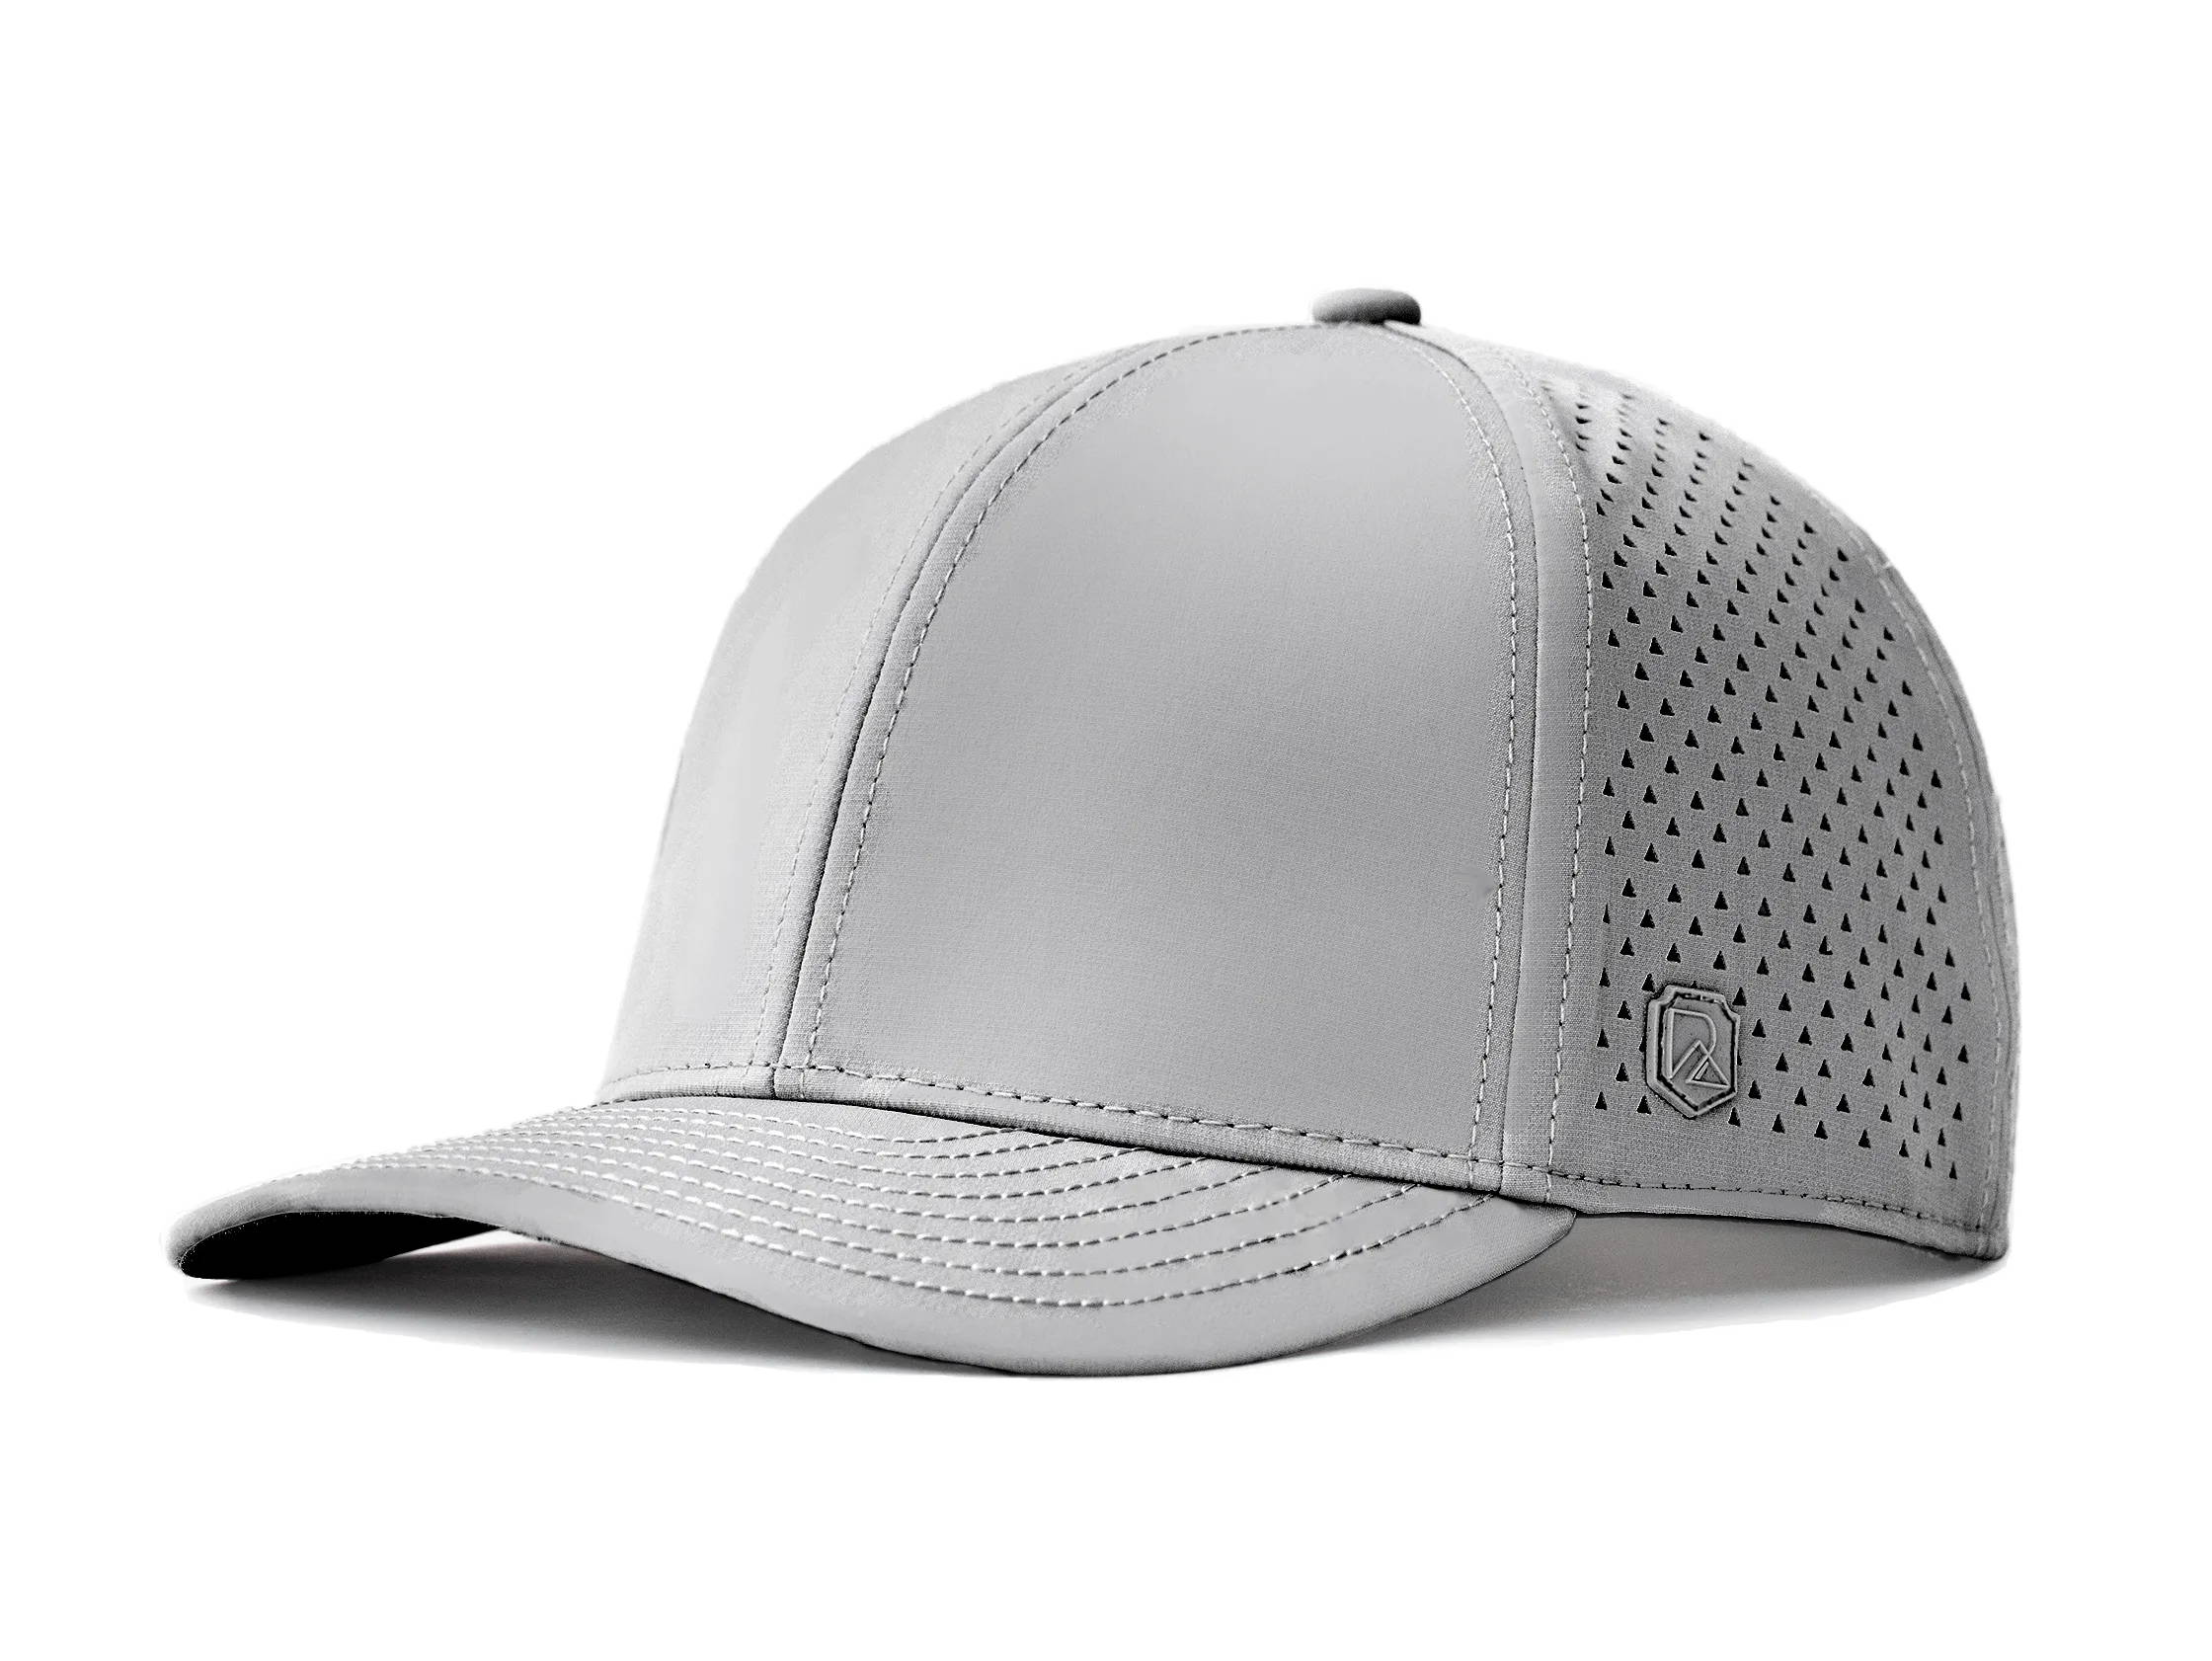 23 Best Golf Hats of 2023 – The Coolest and Most Comfortable